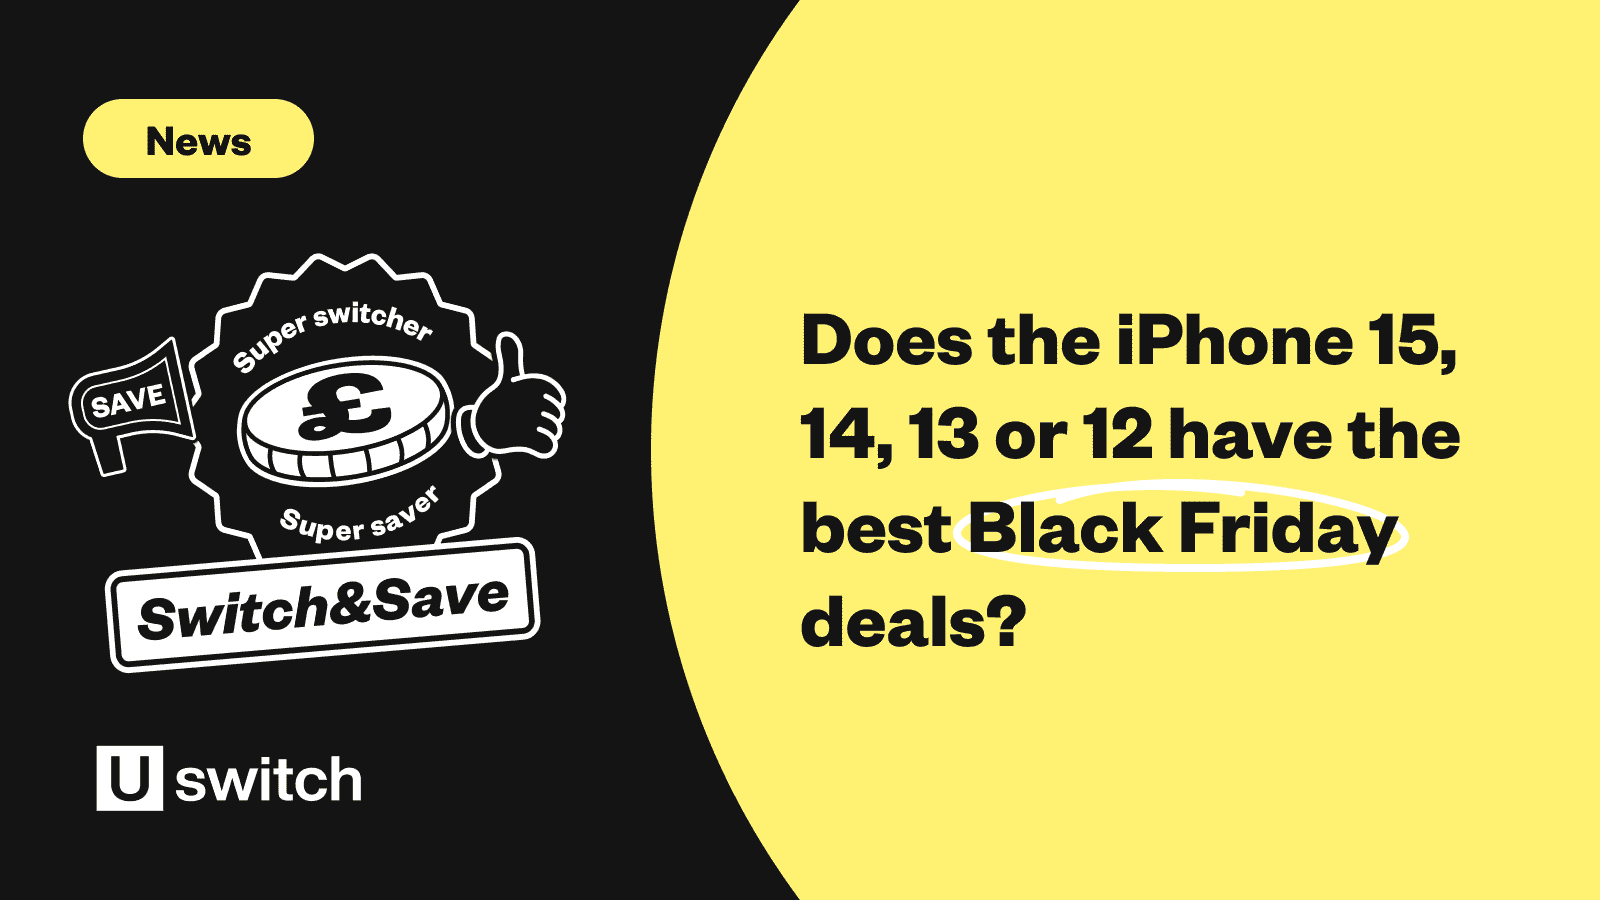 You could get free Apple TV+ with these fantastic Black Friday iPhone deals  2023- Uswitch